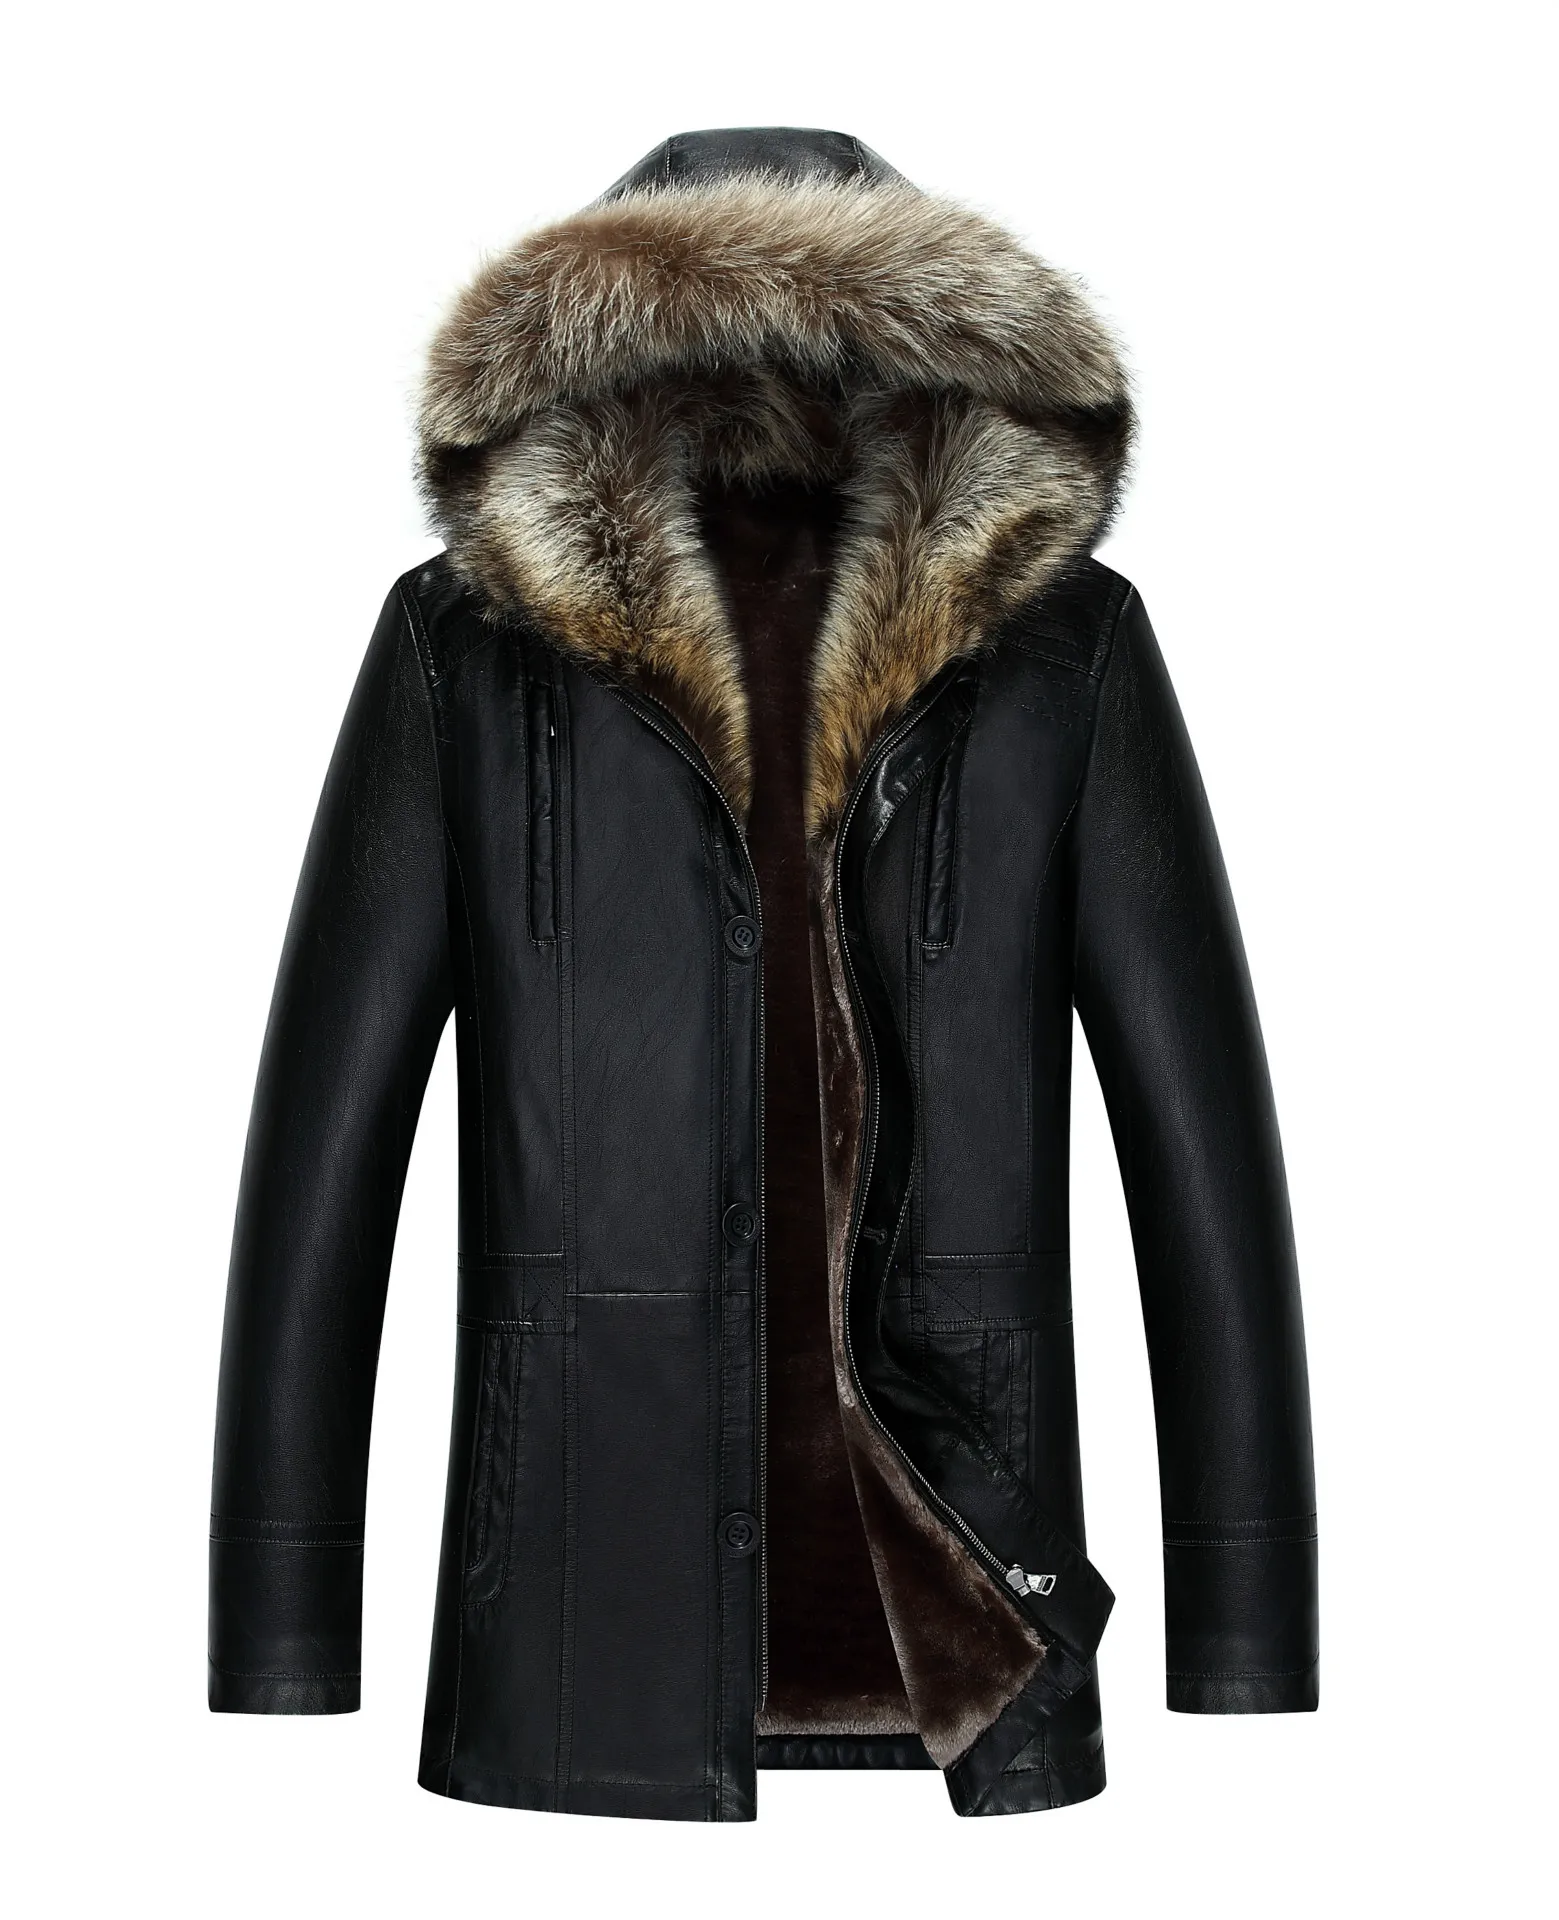 Men Genuine Leather Jacket Winter Coats Real Raccoon Fur Collar Hooded Cashmere Tops Snow Outwear Overcoat Warm Thick outdoor Plus Size